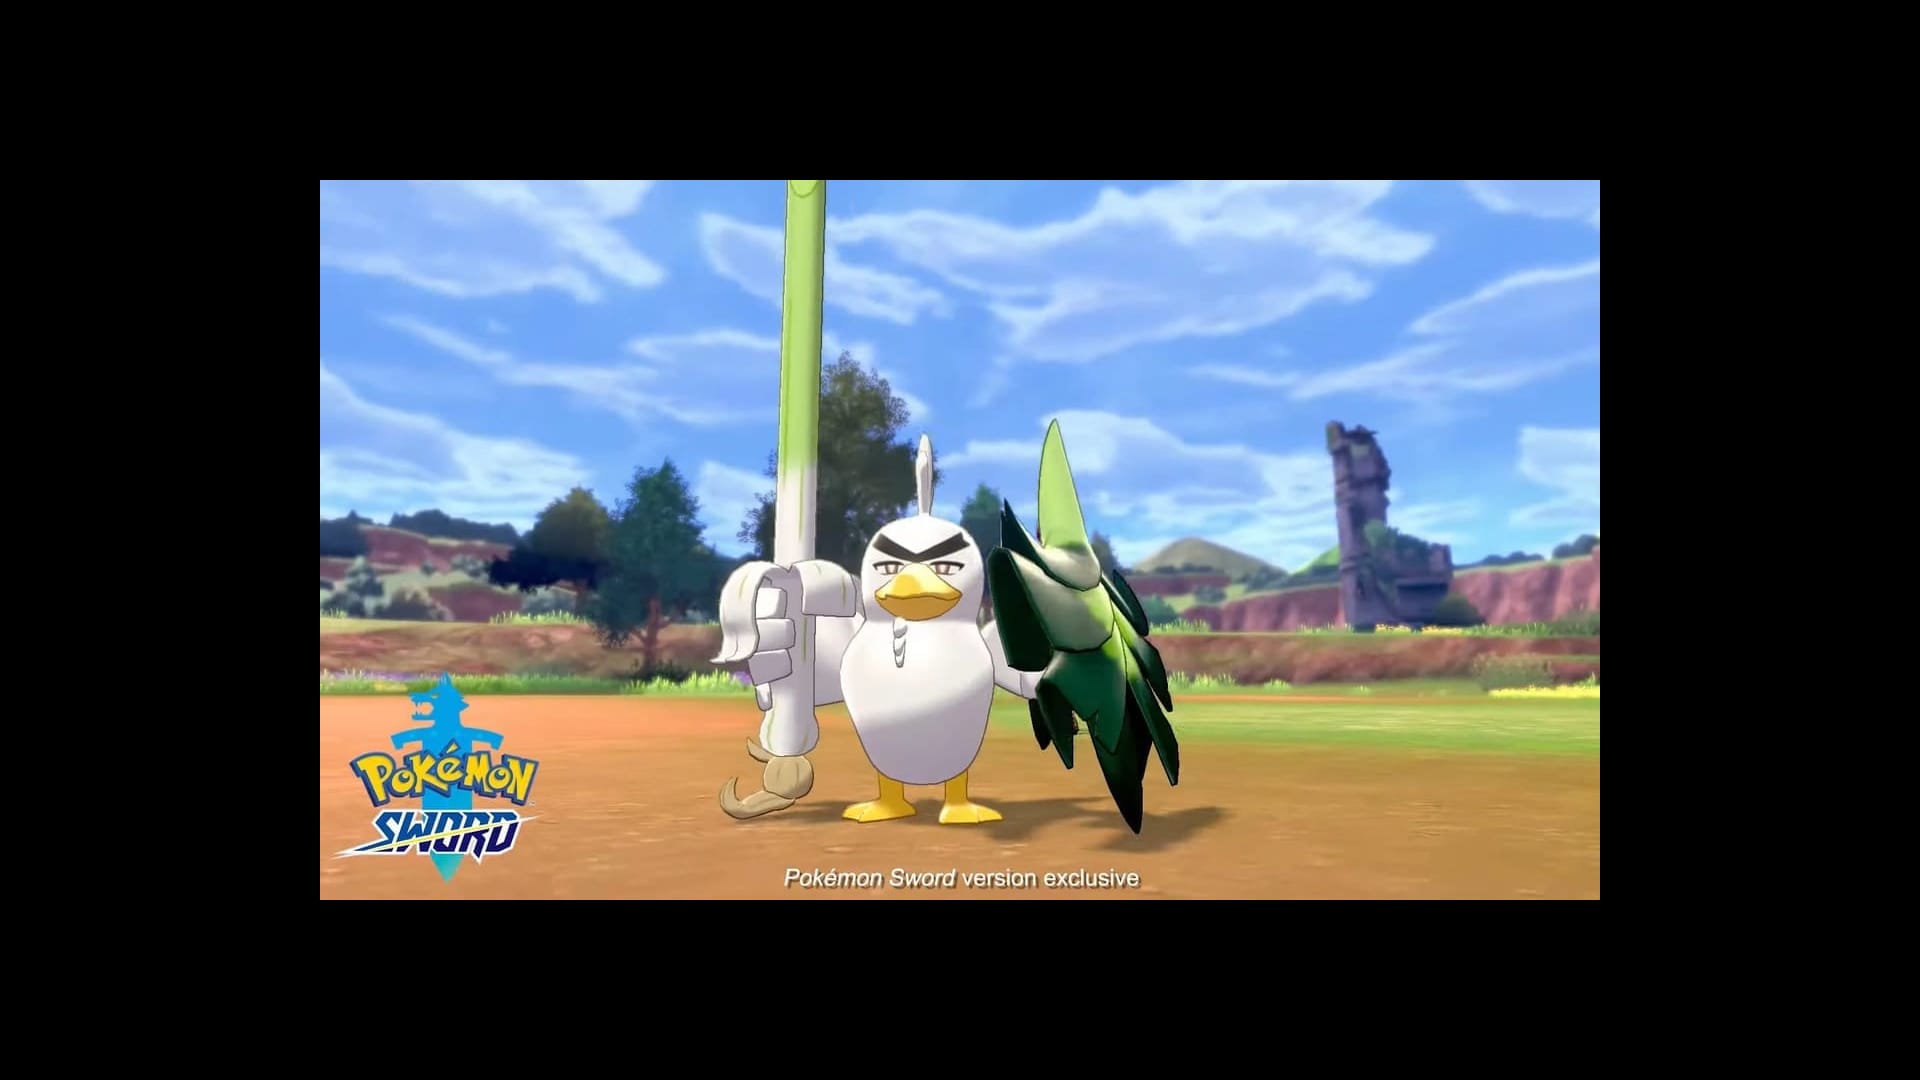 HOW TO GET Galarian Farfetch'd in Pokémon Sword (version exclusive) 